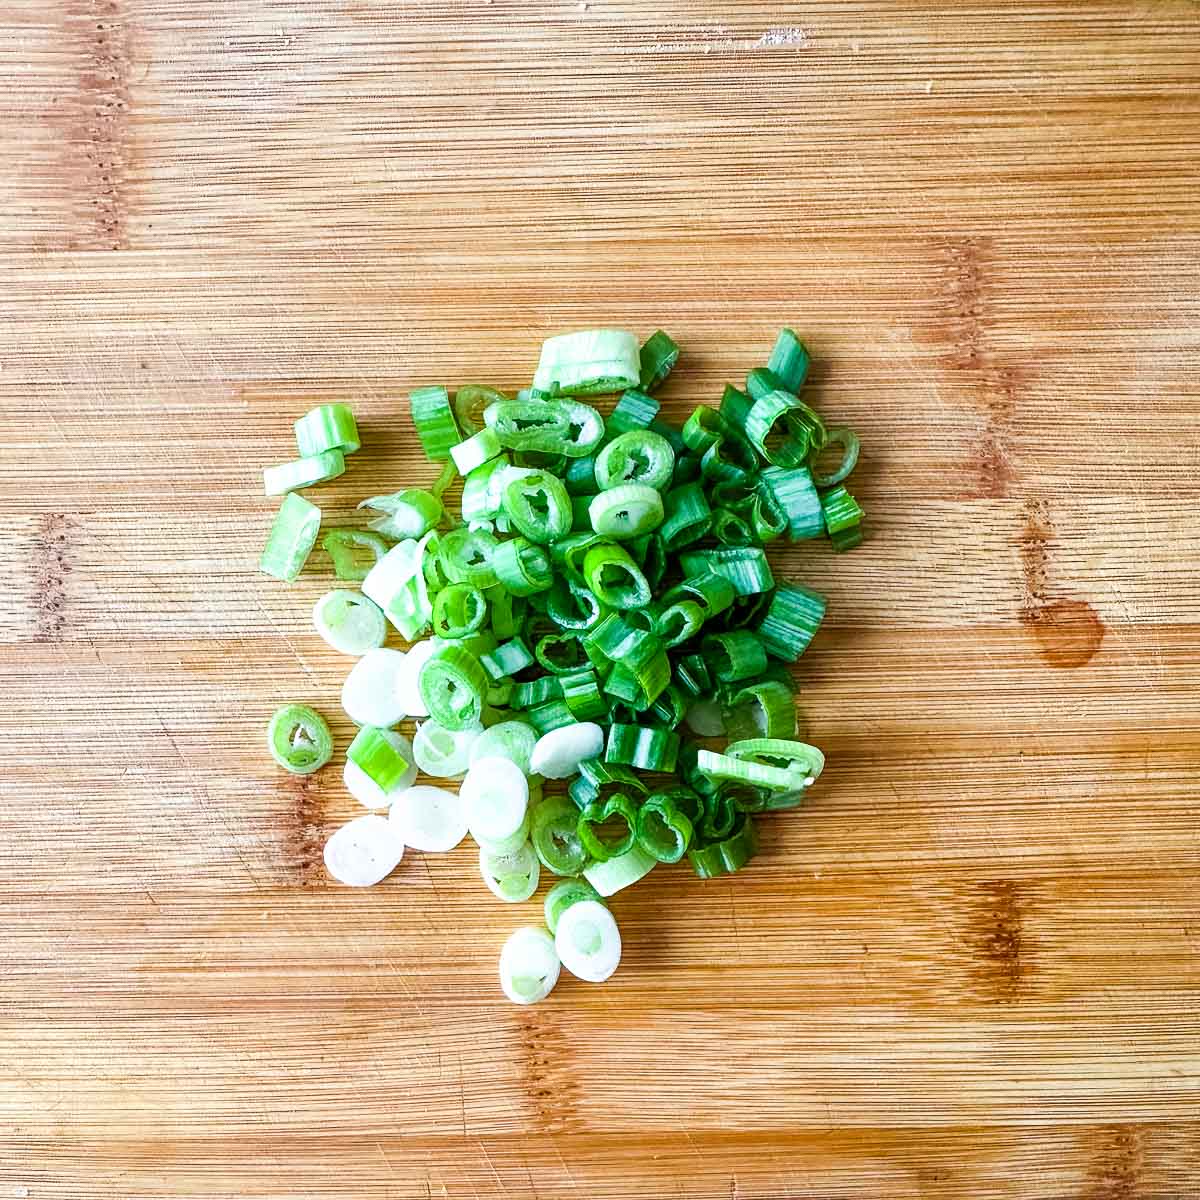 Chopped scallions on a wooden cutting board.